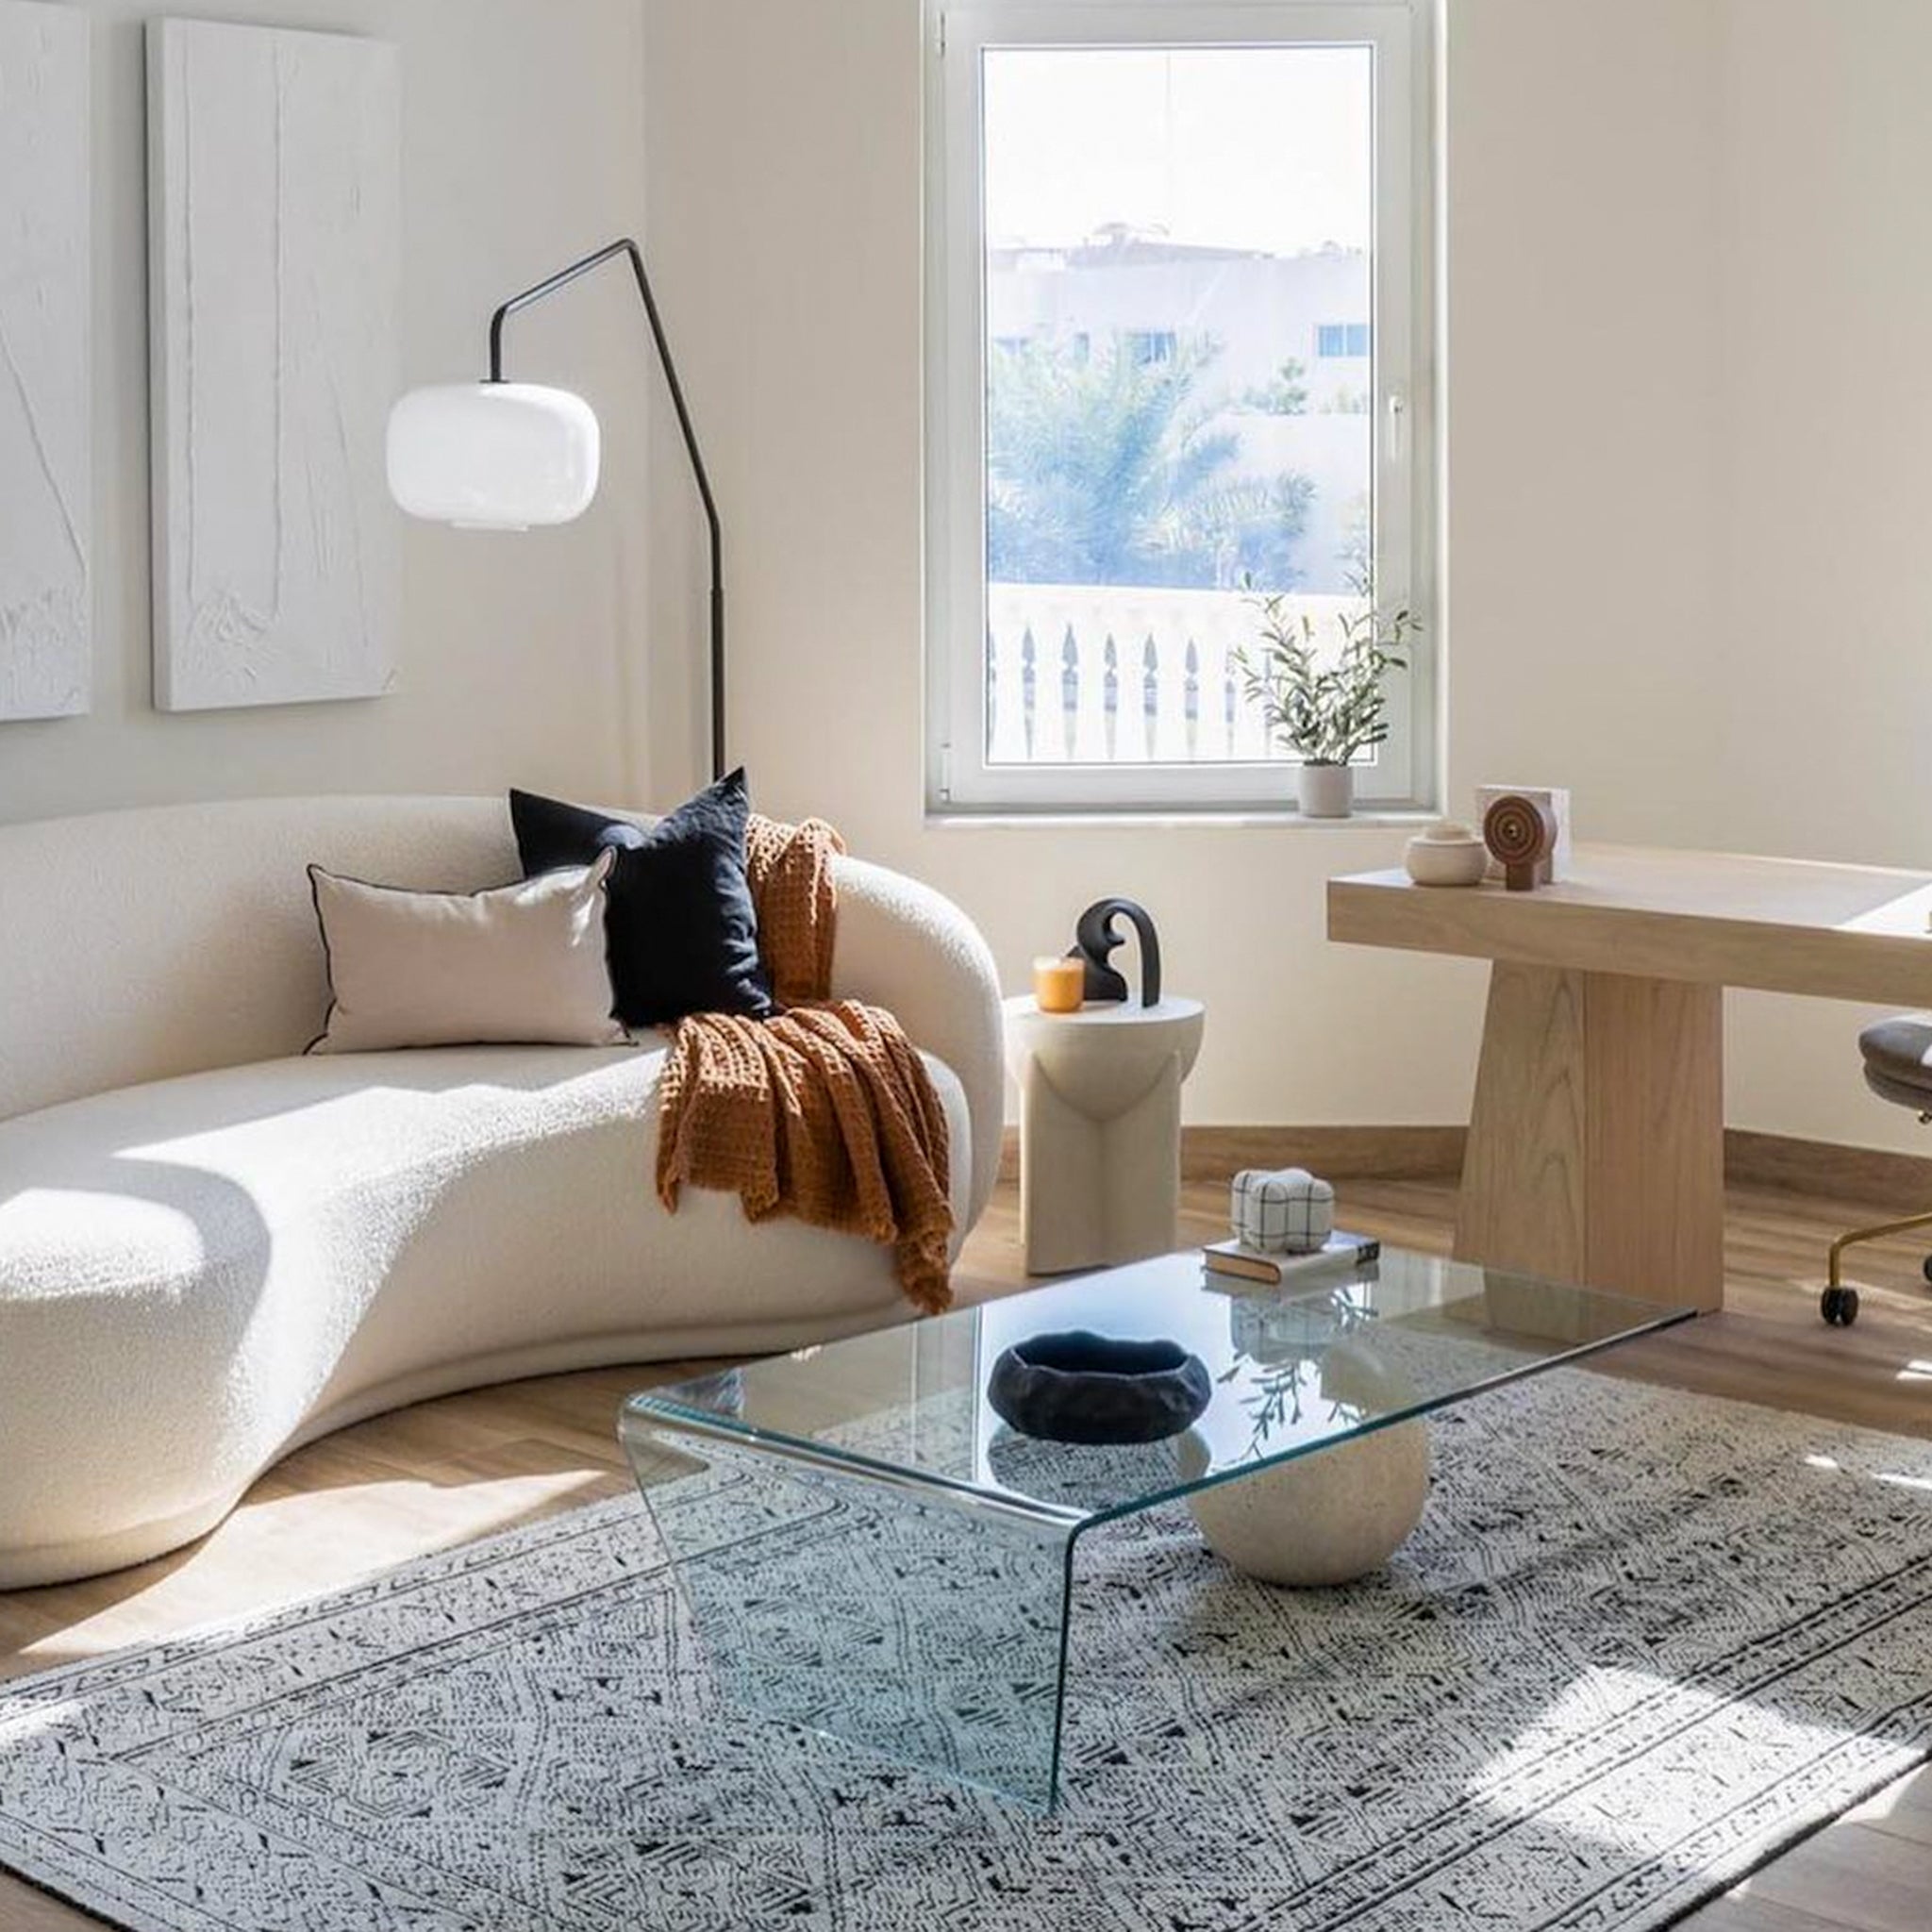 Spacious living room showcasing a plush white L-shaped couch, rich brown leather ottoman, and a sleek wooden side table, perfect for entertaining guests.